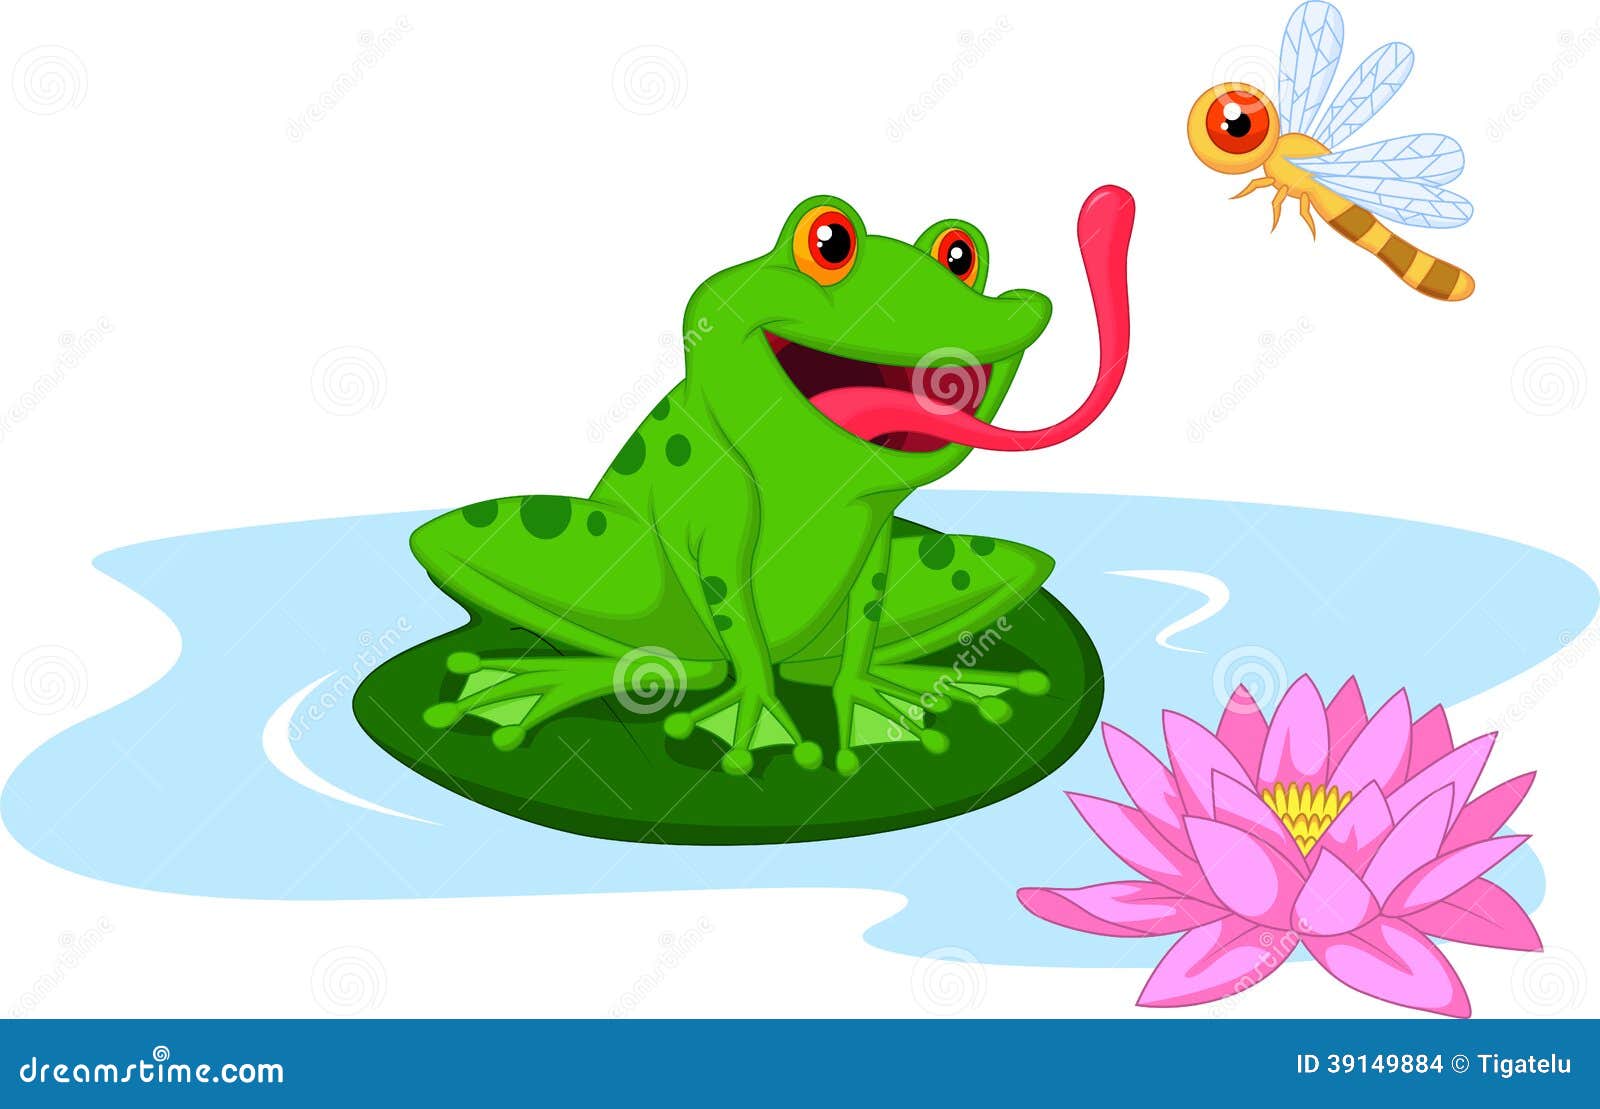 Cute Cartoon Frog Catching Dragonfly Stock Vector - Illustration of cute,  baby: 39149884